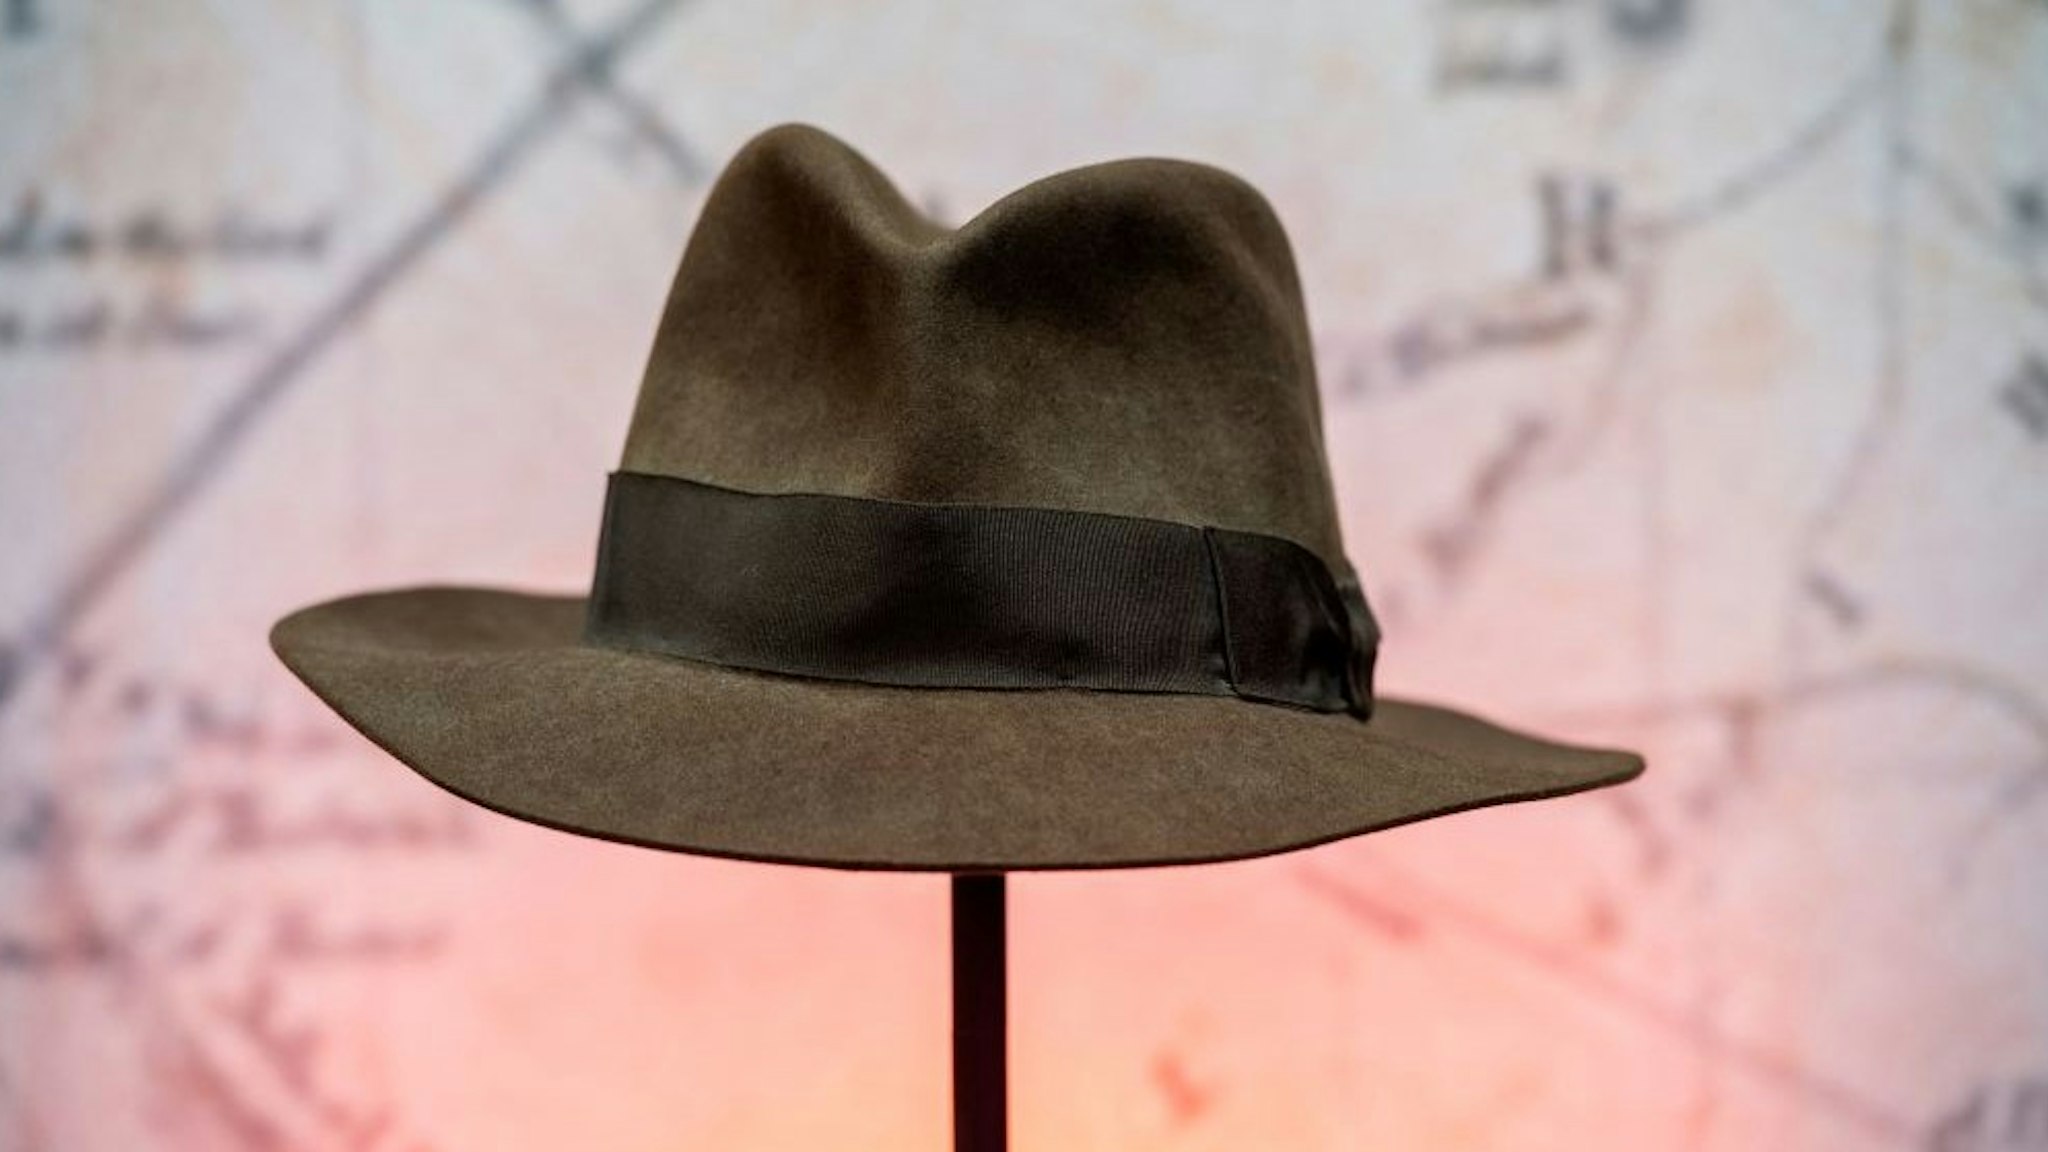 Harrison Ford's Indiana Jones' fedora hat from the movie "Indiana Jones &amp; the Temple of Doom" is exhibited during a press preview of Prop Store's Iconic Film &amp; TV Memorabilia on May 14, 2021, in Valencia, California. - Over 1,200 items from Hollywood folklore will go on sale in June and July, including Princess Leia actor Carrie Fisher's "Star Wars: The Empire Strikes Back" script, the custom-made hat worn by Harrison Ford in 1984 action classic "Indiana Jones and the Temple of Doom" and Tom Cruise's sword from "The Last Samurai." (Photo by VALERIE MACON / AFP) (Photo by